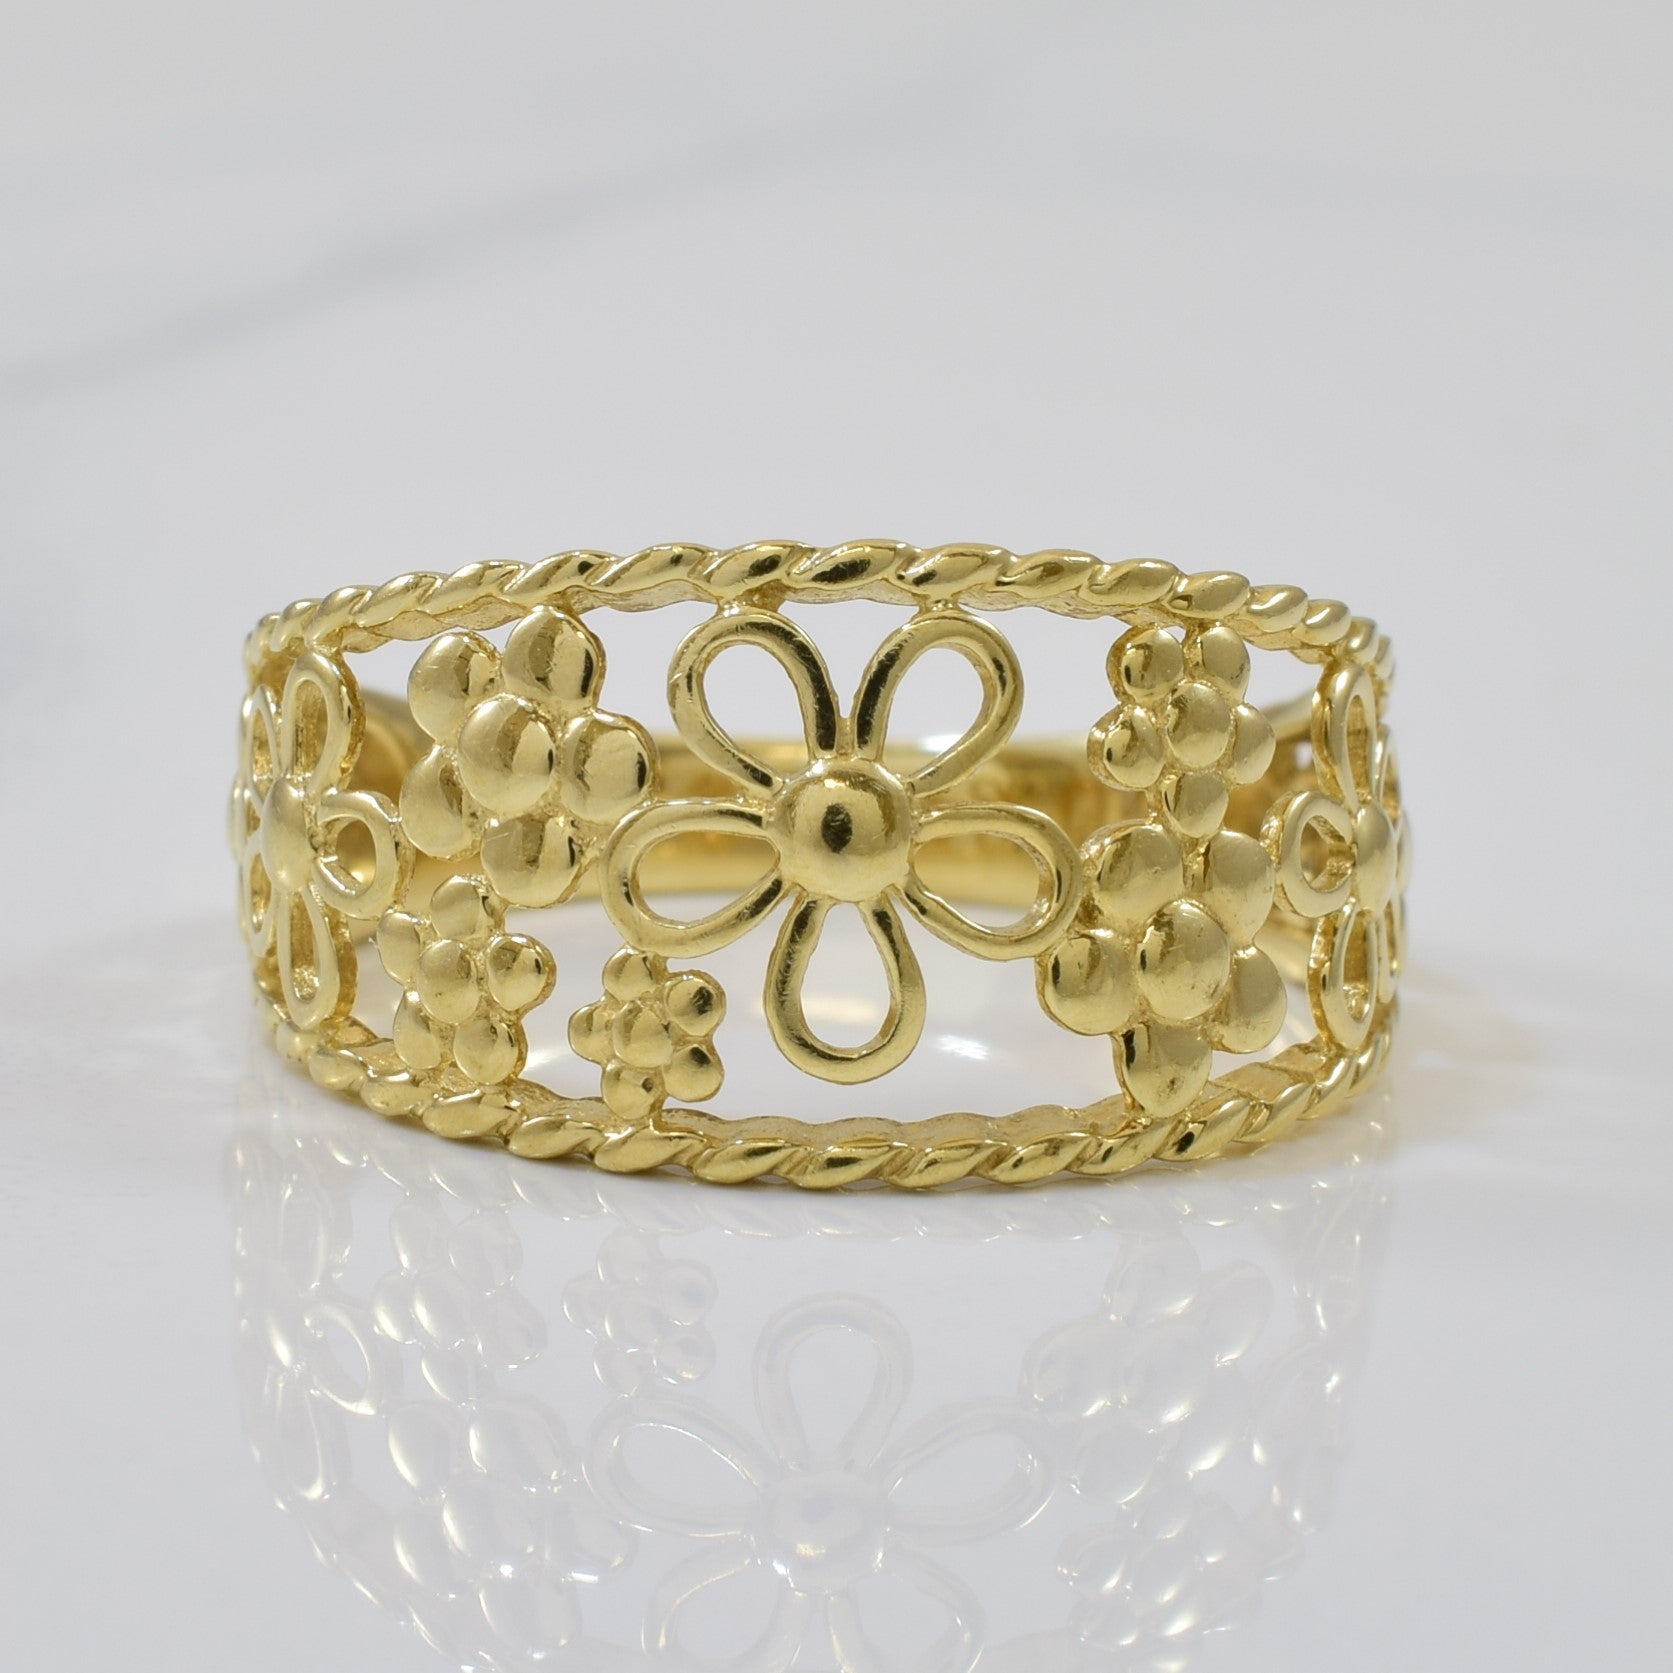 Tapered Open Work Floral Ring | SZ 7.5 |